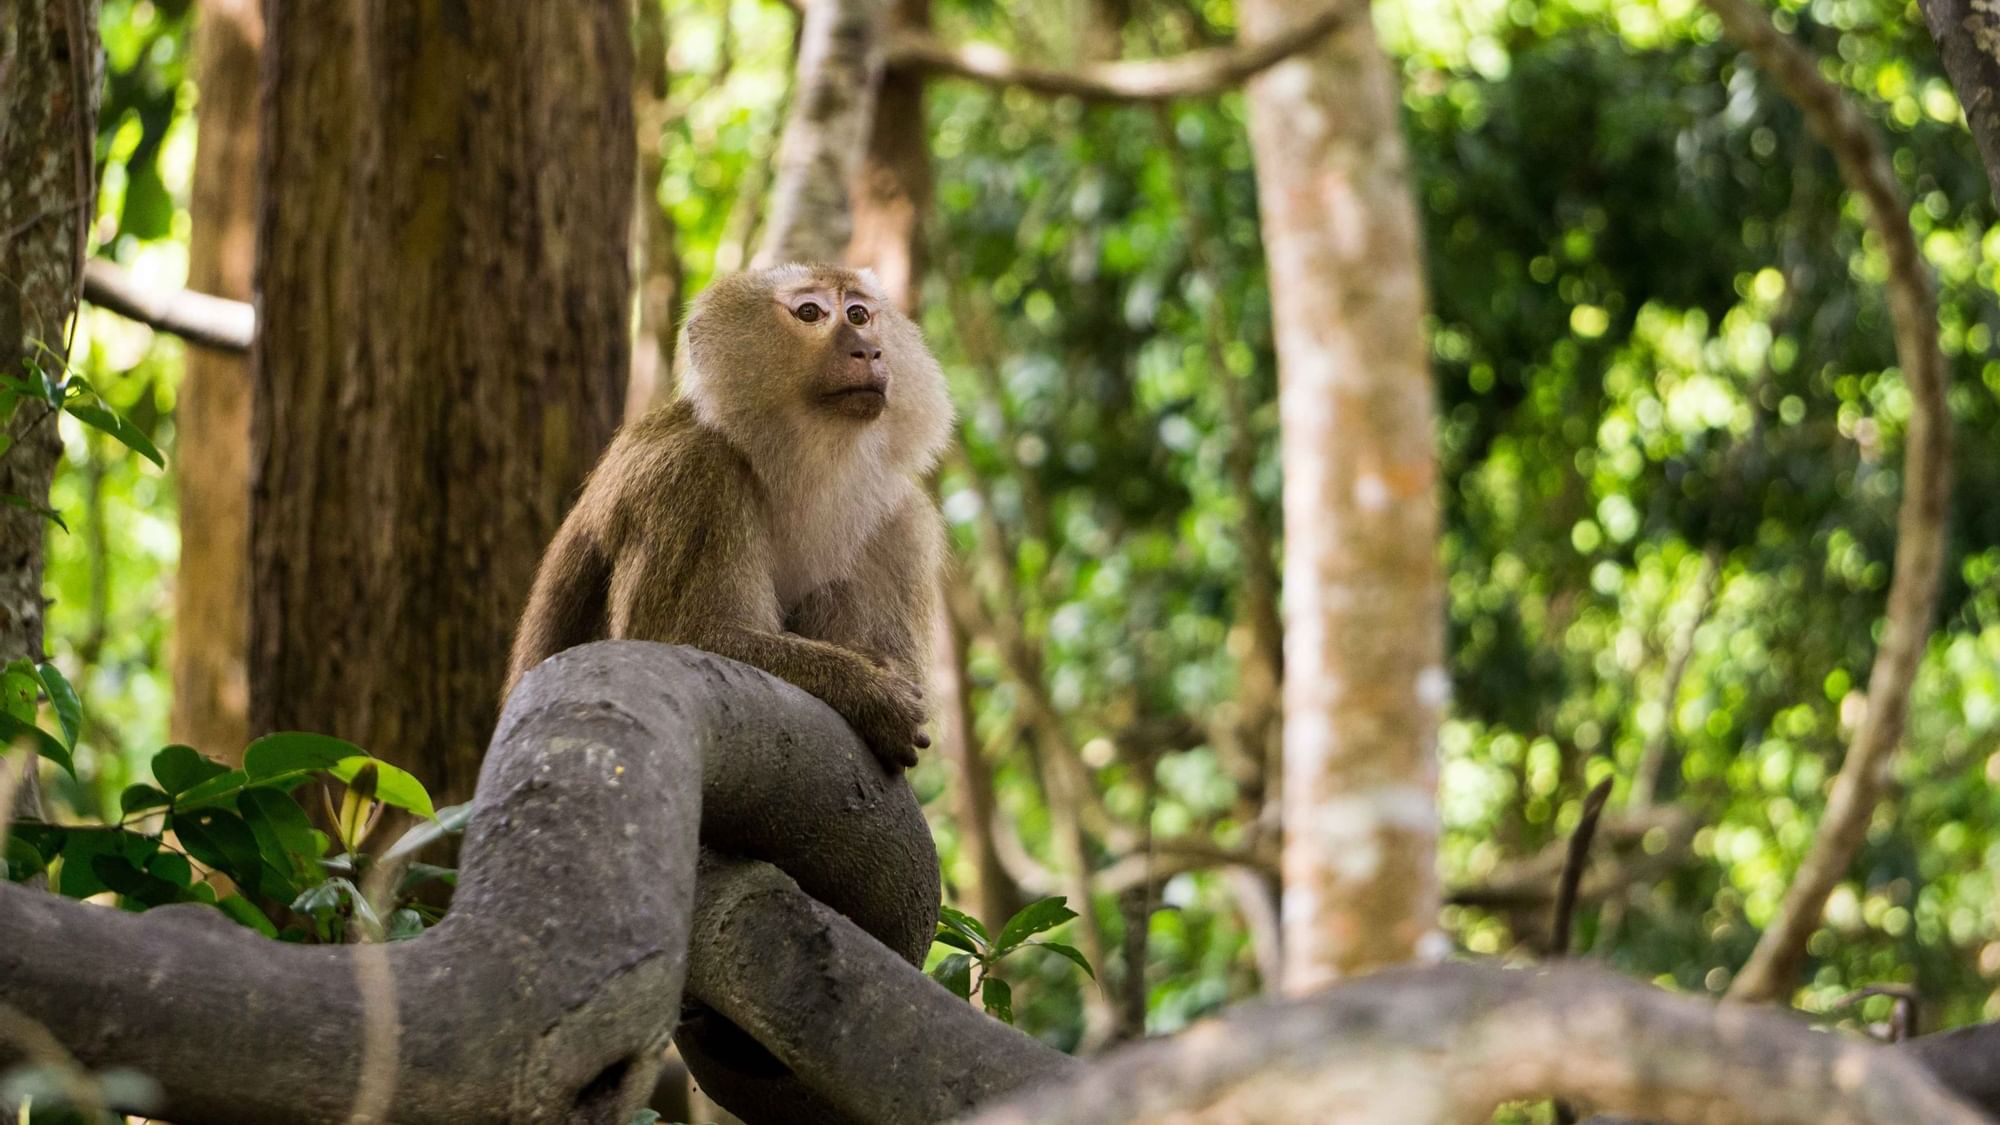 Closeup of a monkey on a branch in a zoo near Originals Hotels